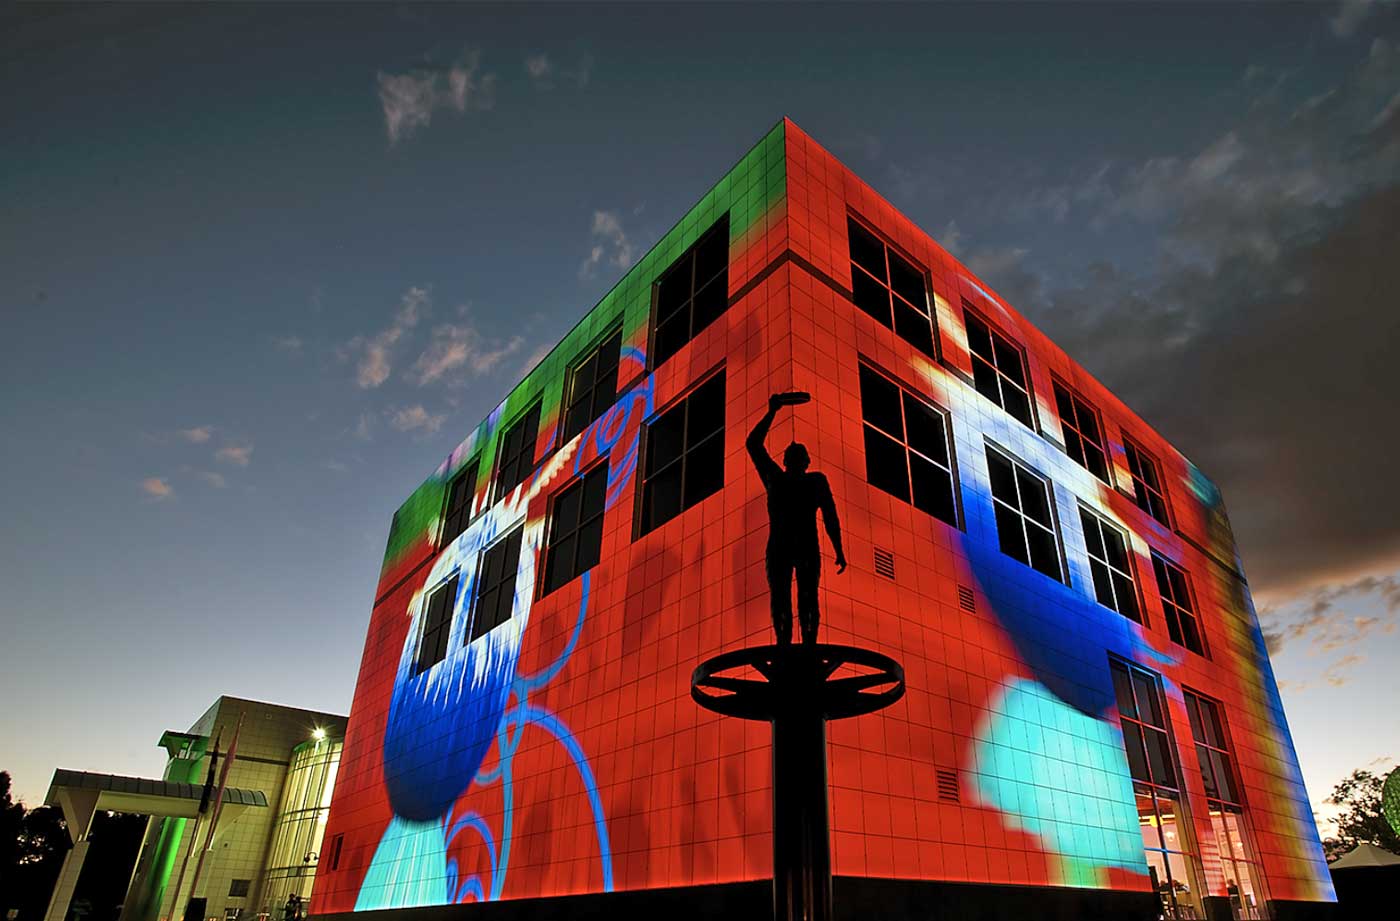 Questacon - The National Science and Technology Centre